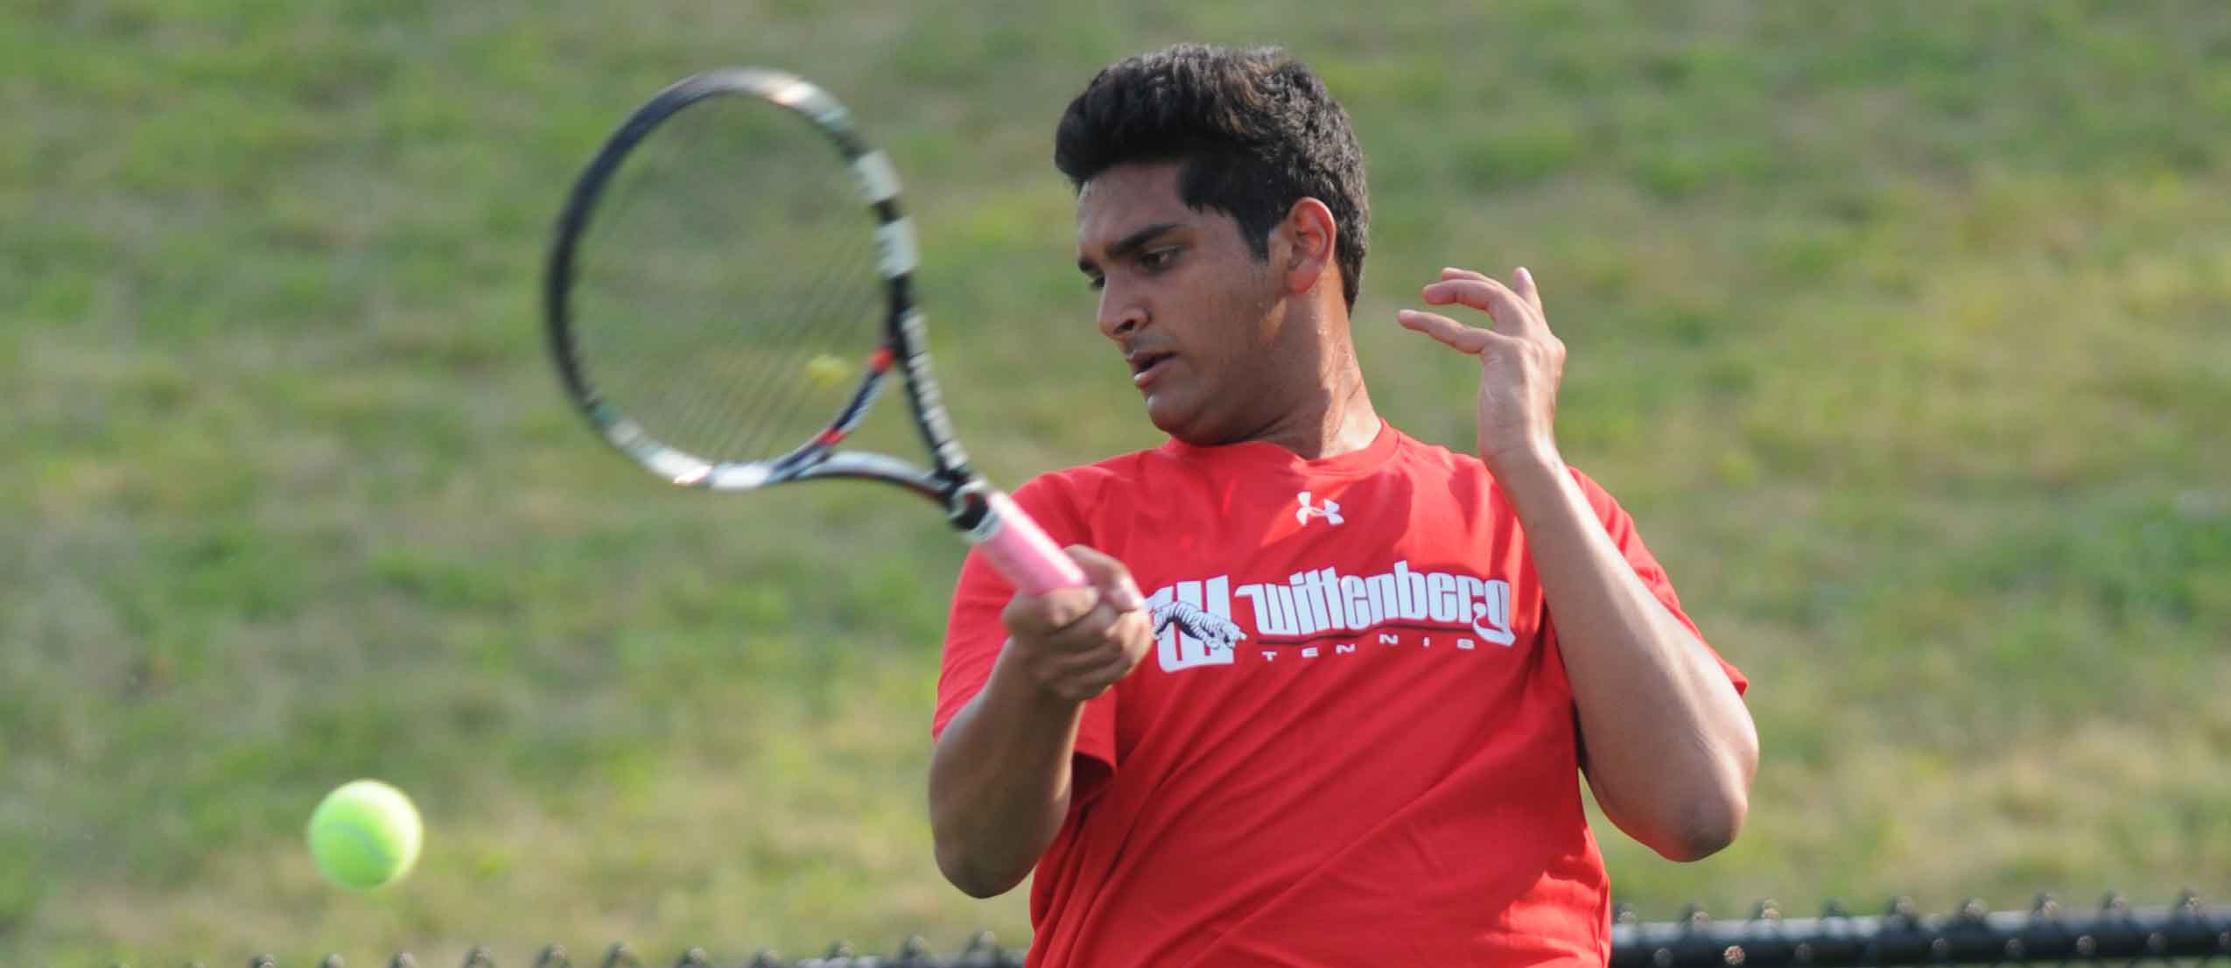 Akbar Tiwana and the Tigers pulled out a 6-3 win over Northwestern. File Photo | Nick Falzerano